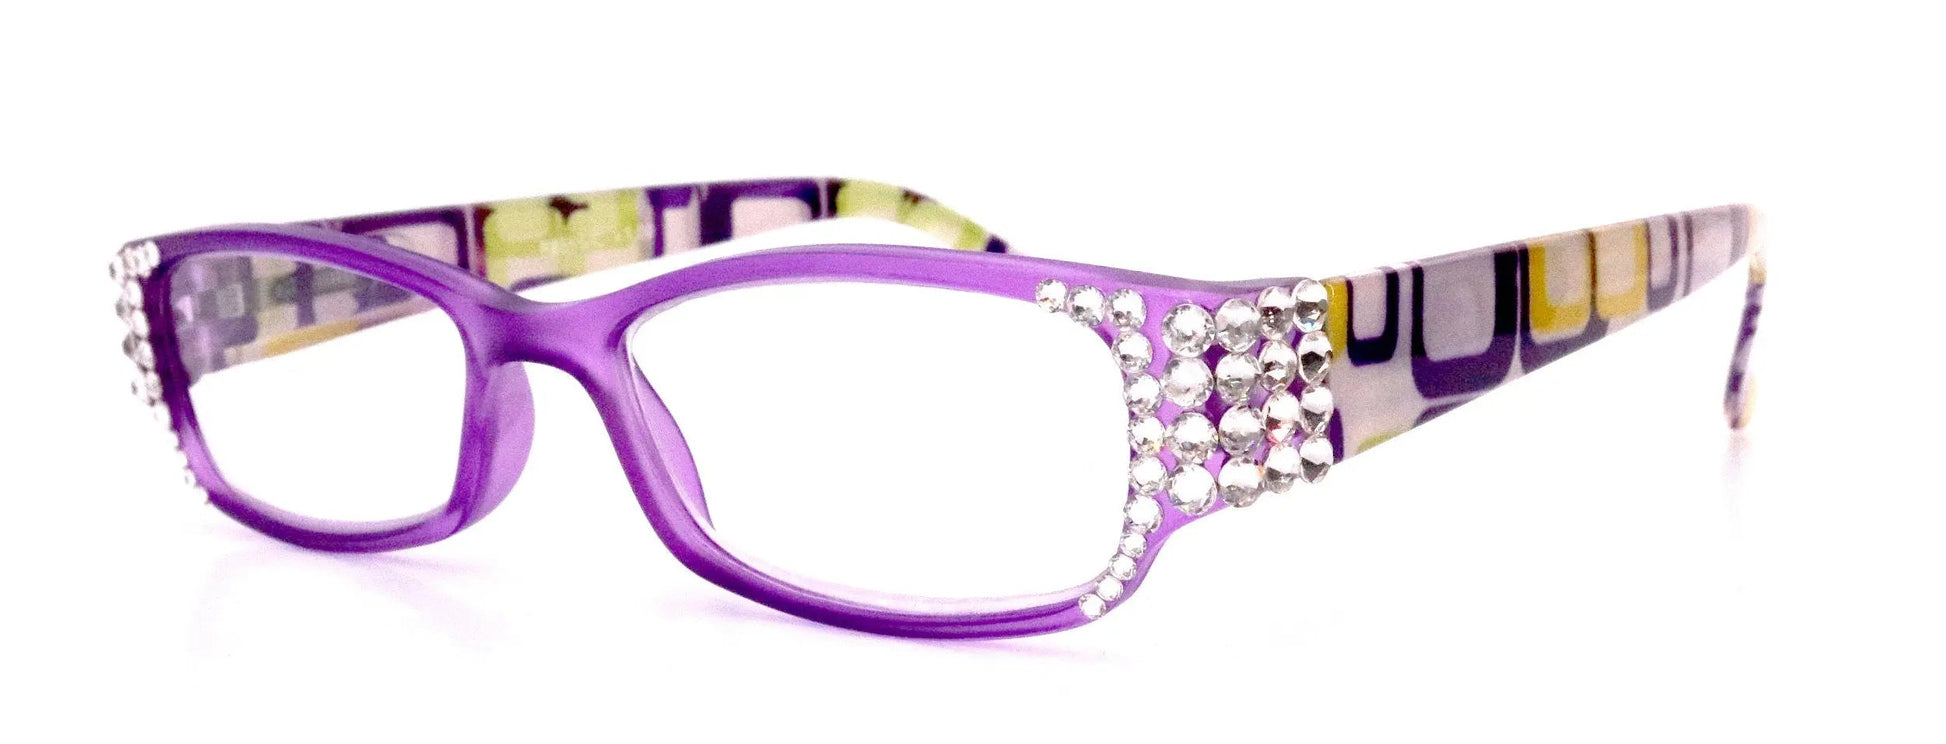 Daisy, (Bling) Reading Glasses for women Adorned WClear Genuine European Crystals+1..+4 Magnification  NY Fifth Avenue